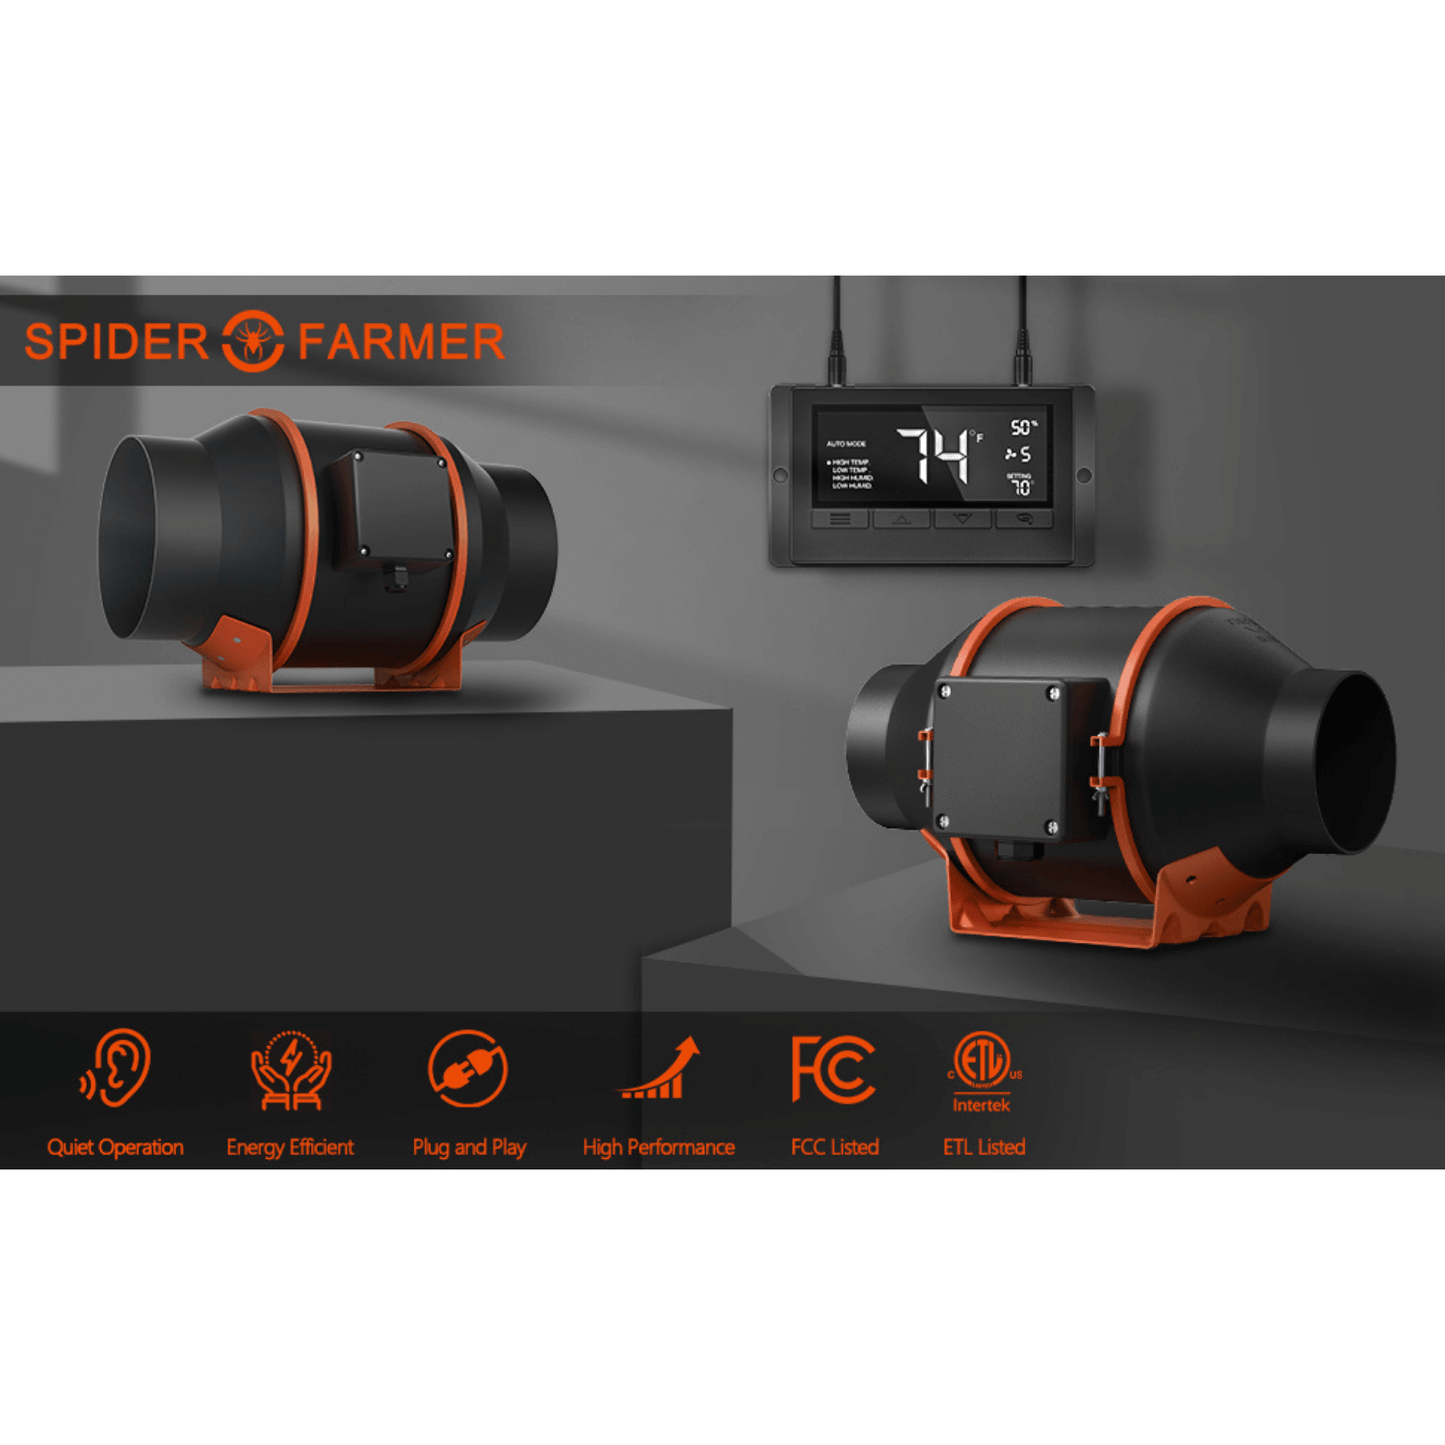 Spider Farmer 6" Inline Duct Fan with Temperature and Humidity Controller SF-6Inlinefan-CP Ventilation 6973280375509